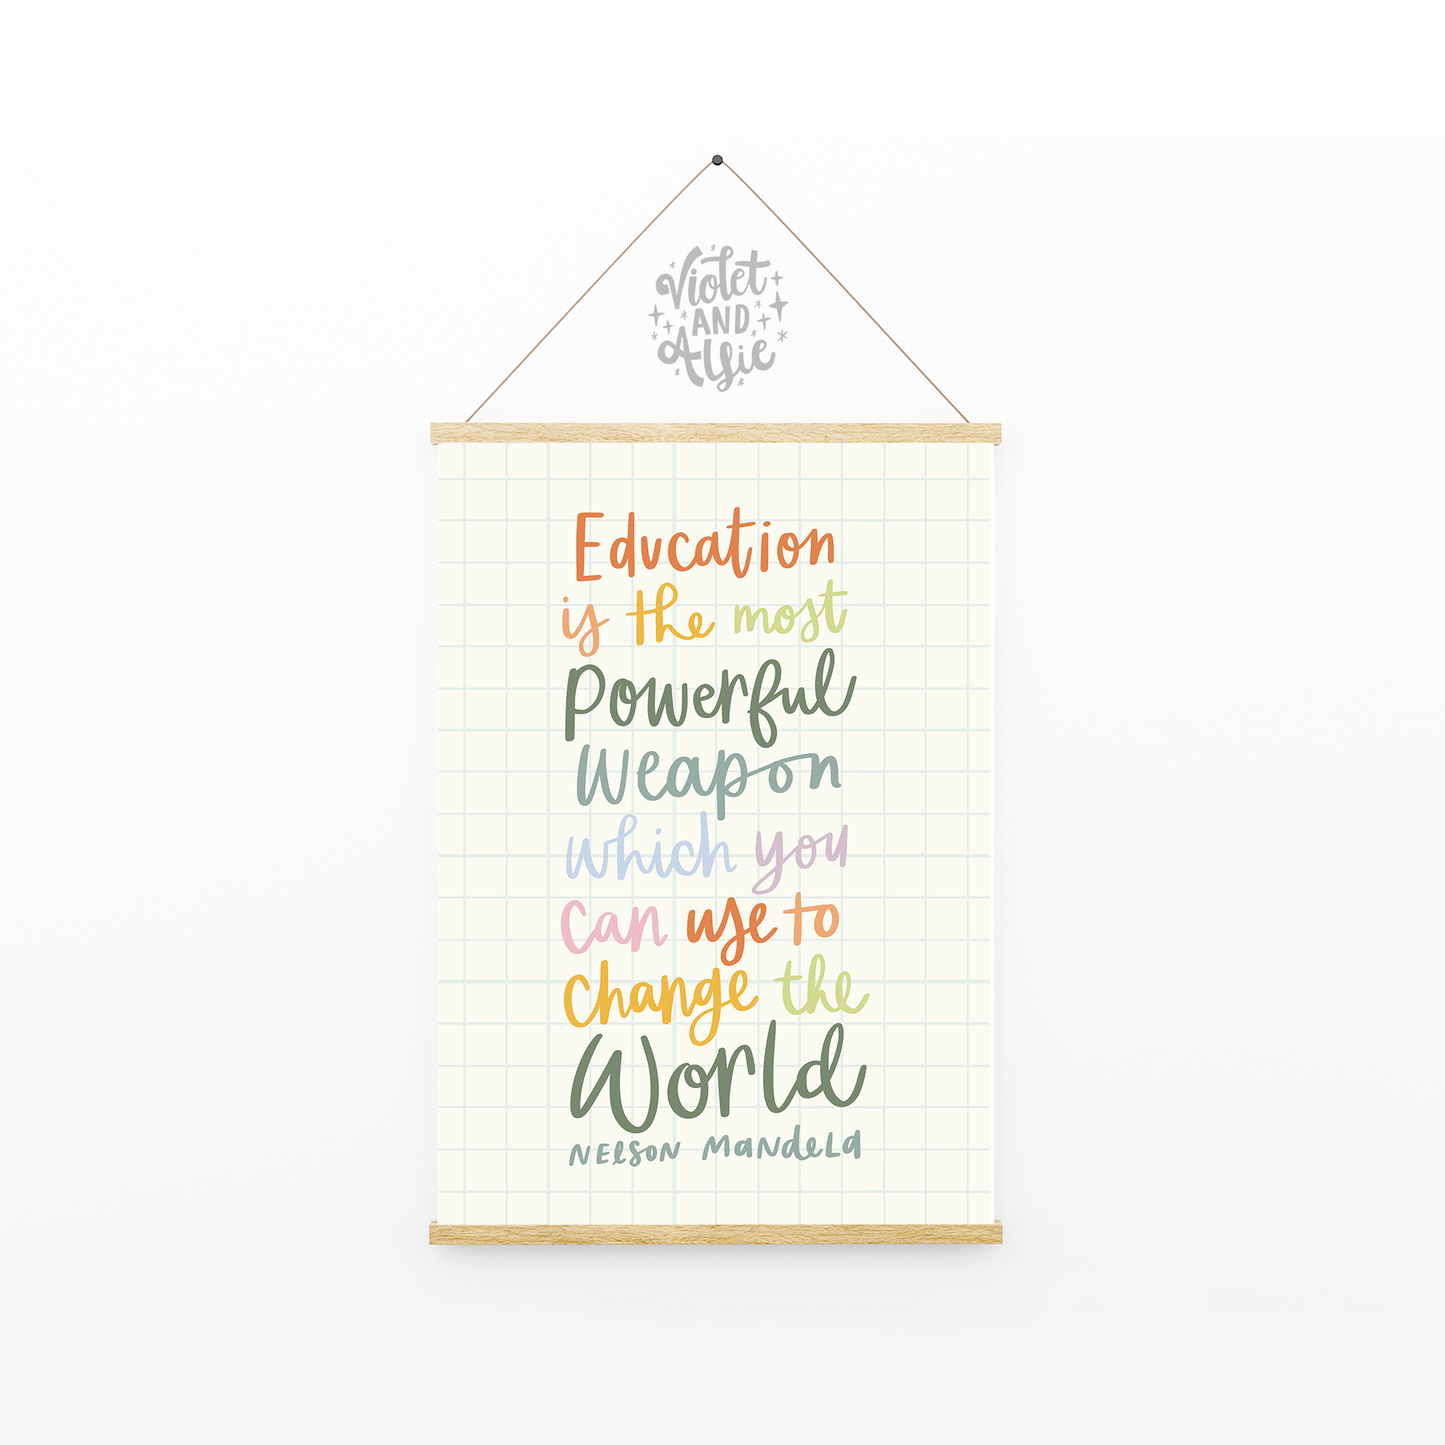 Education is the most powerful weapon which you can use to change the world, Nelson Mandela quote, teacher quote, classroom decor, school wall art, teacher gift, teacher thank you gift, teaching quote